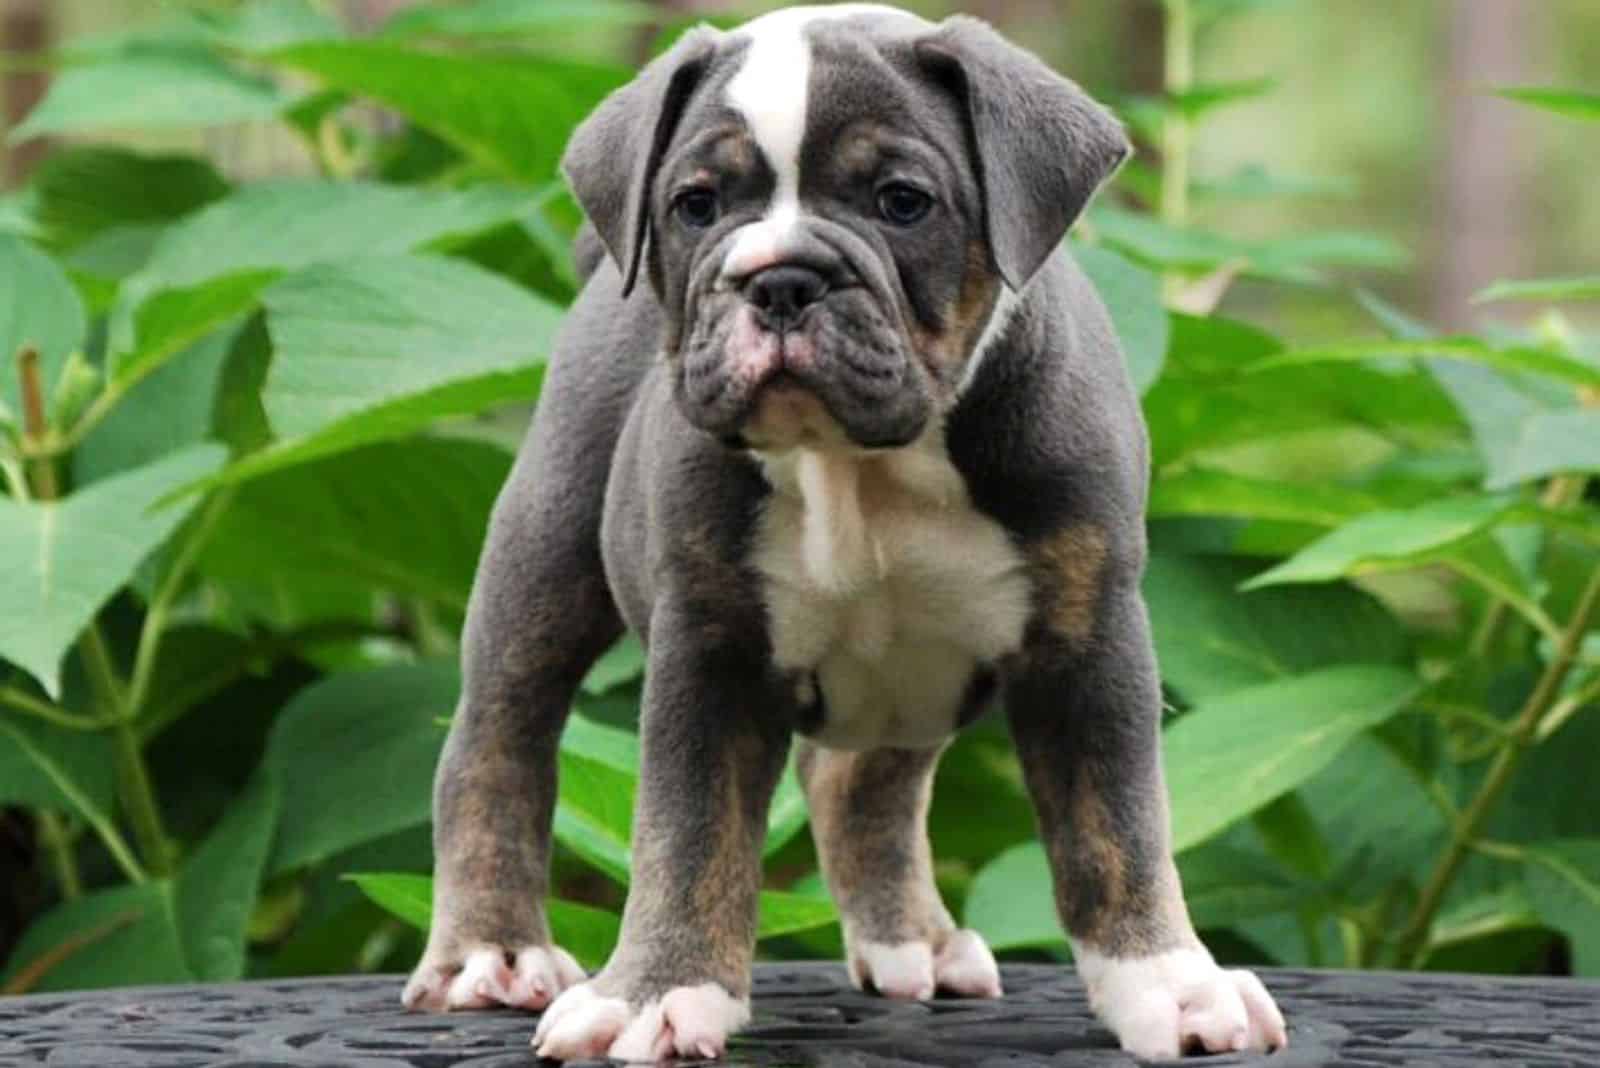 the adorable English Bulldog puppy stands